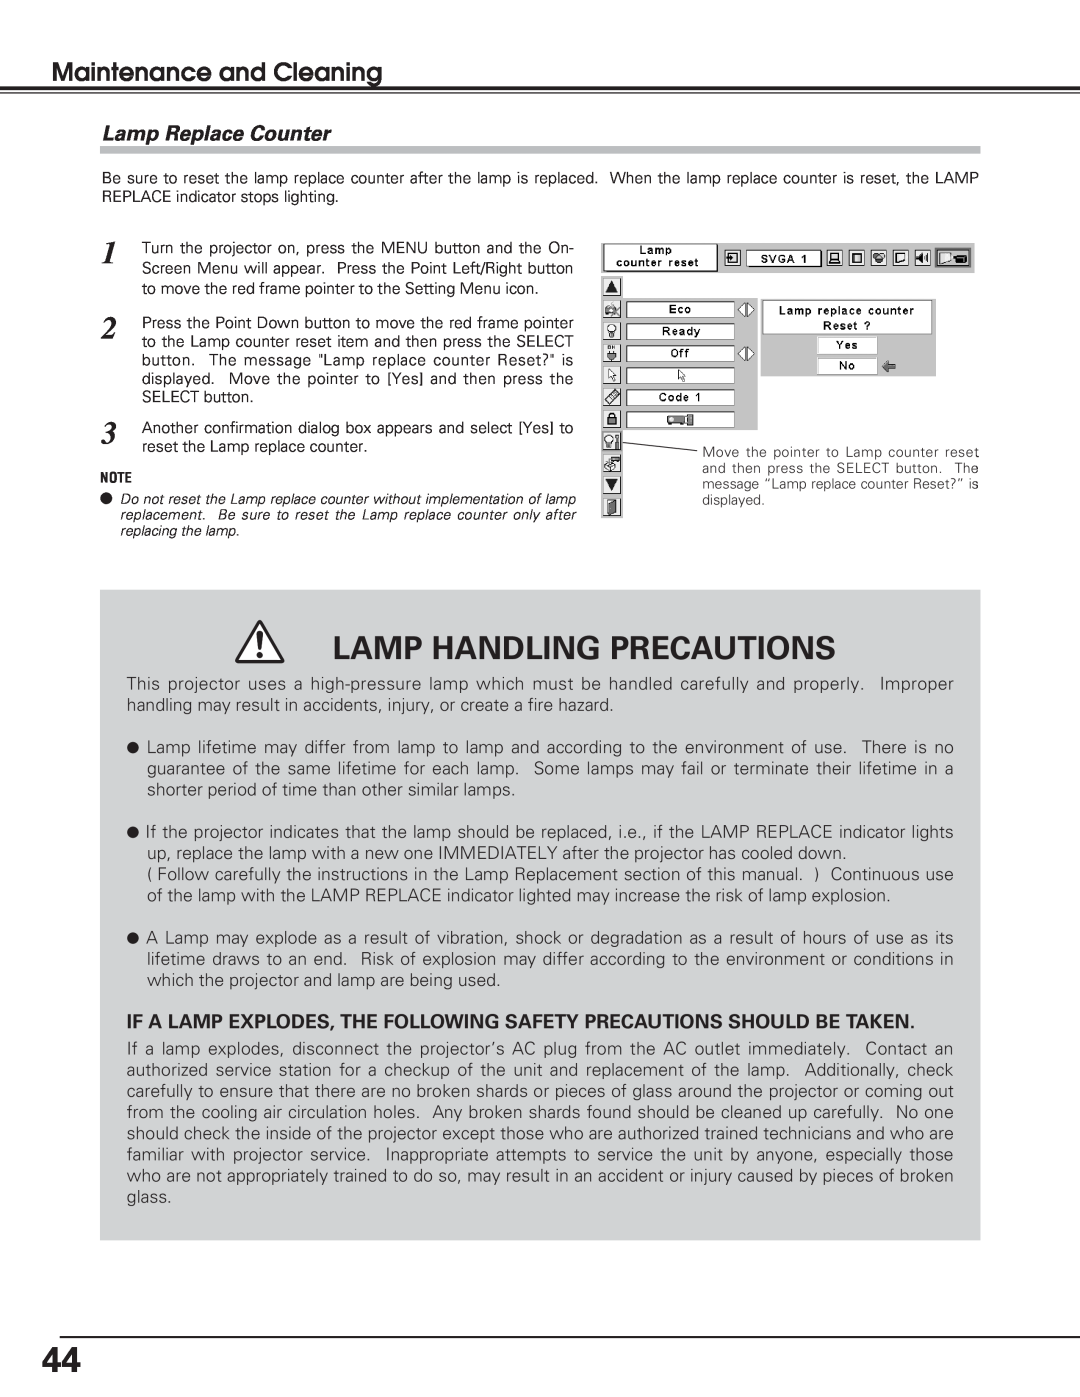 Eiki lc-sb15 owner manual Lamp Replace Counter, Lamp Handling Precautions, Maintenance and Cleaning 